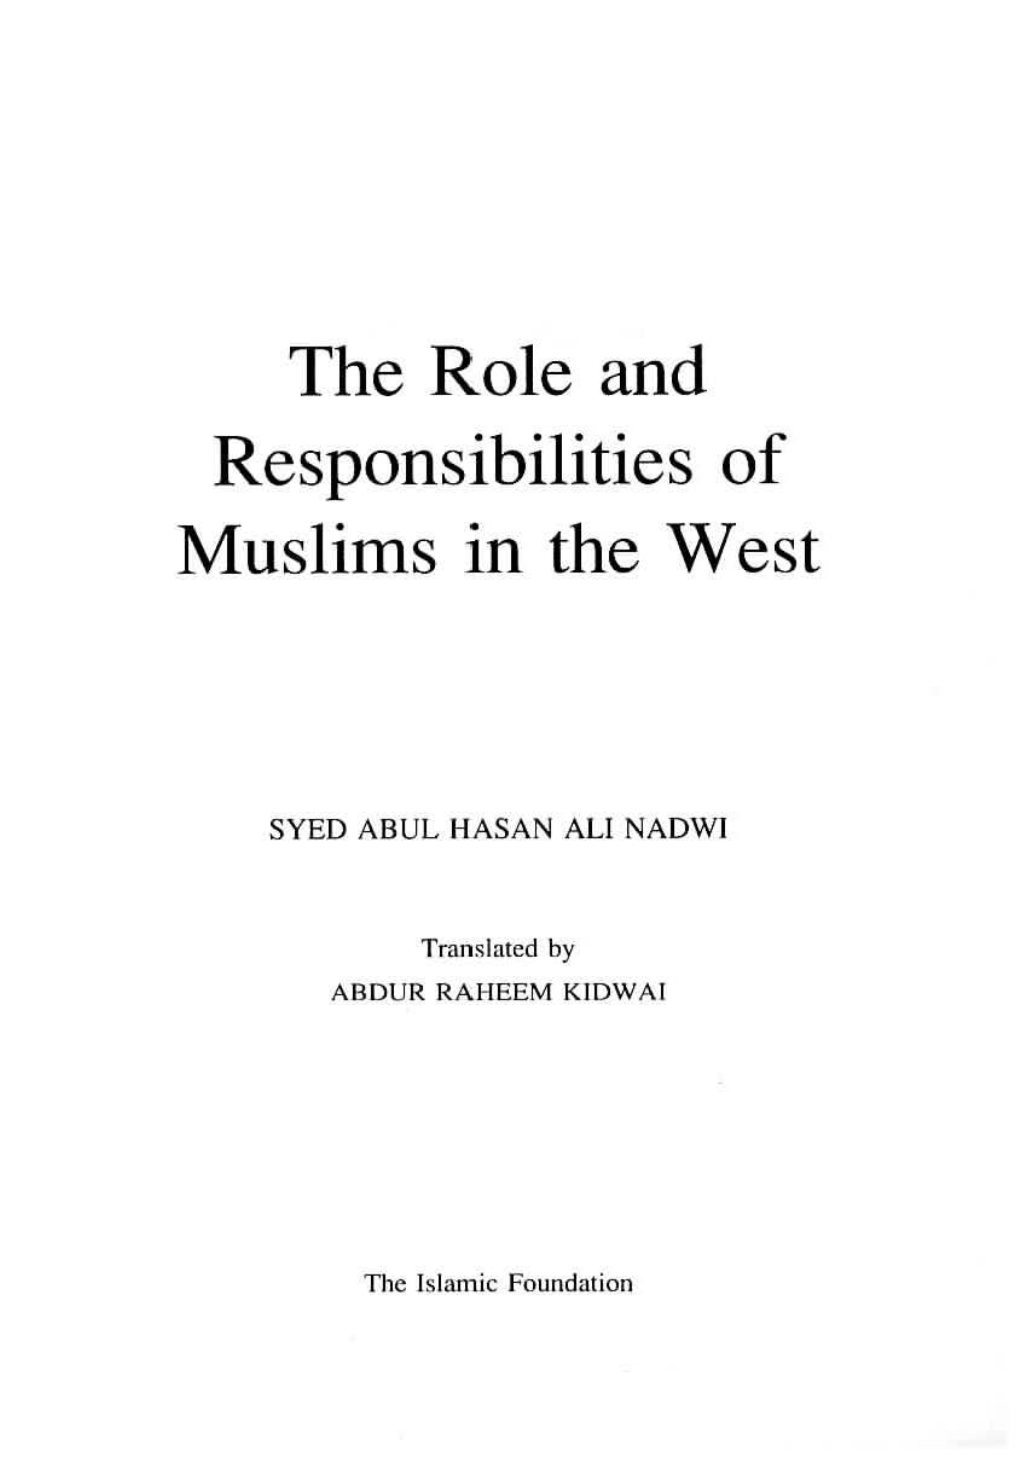 The Role and Responsibilities of Muslims in the West